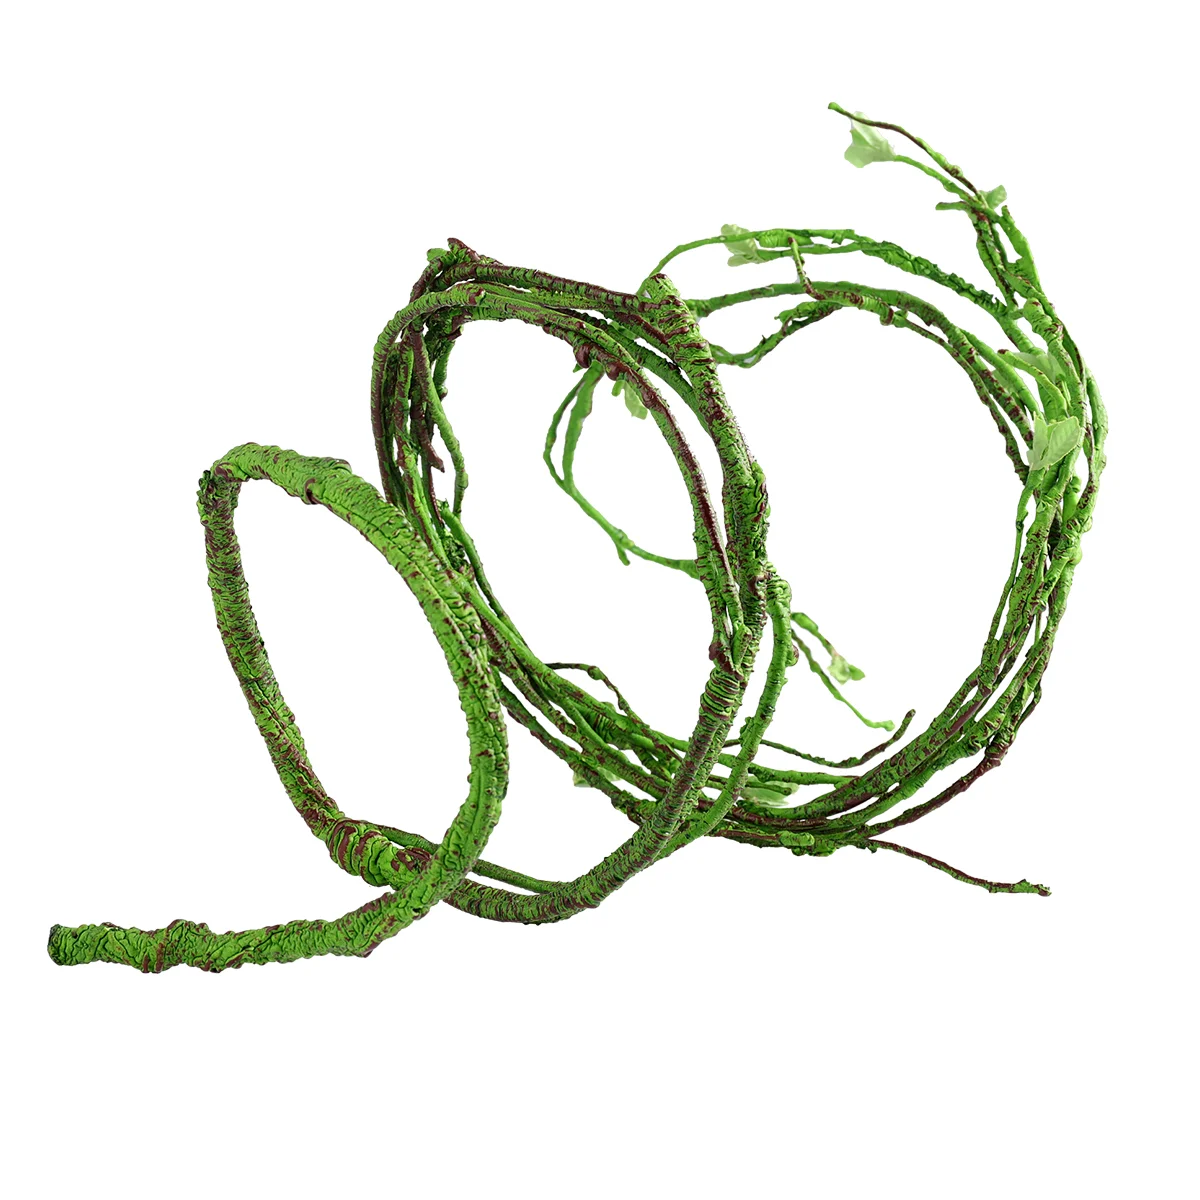 

63 Inches Reptile Vine Artificial Rattan Simulation Reptile Habitat Climbing Jungle Forest Bend Branch for Gecko/ Bearded/